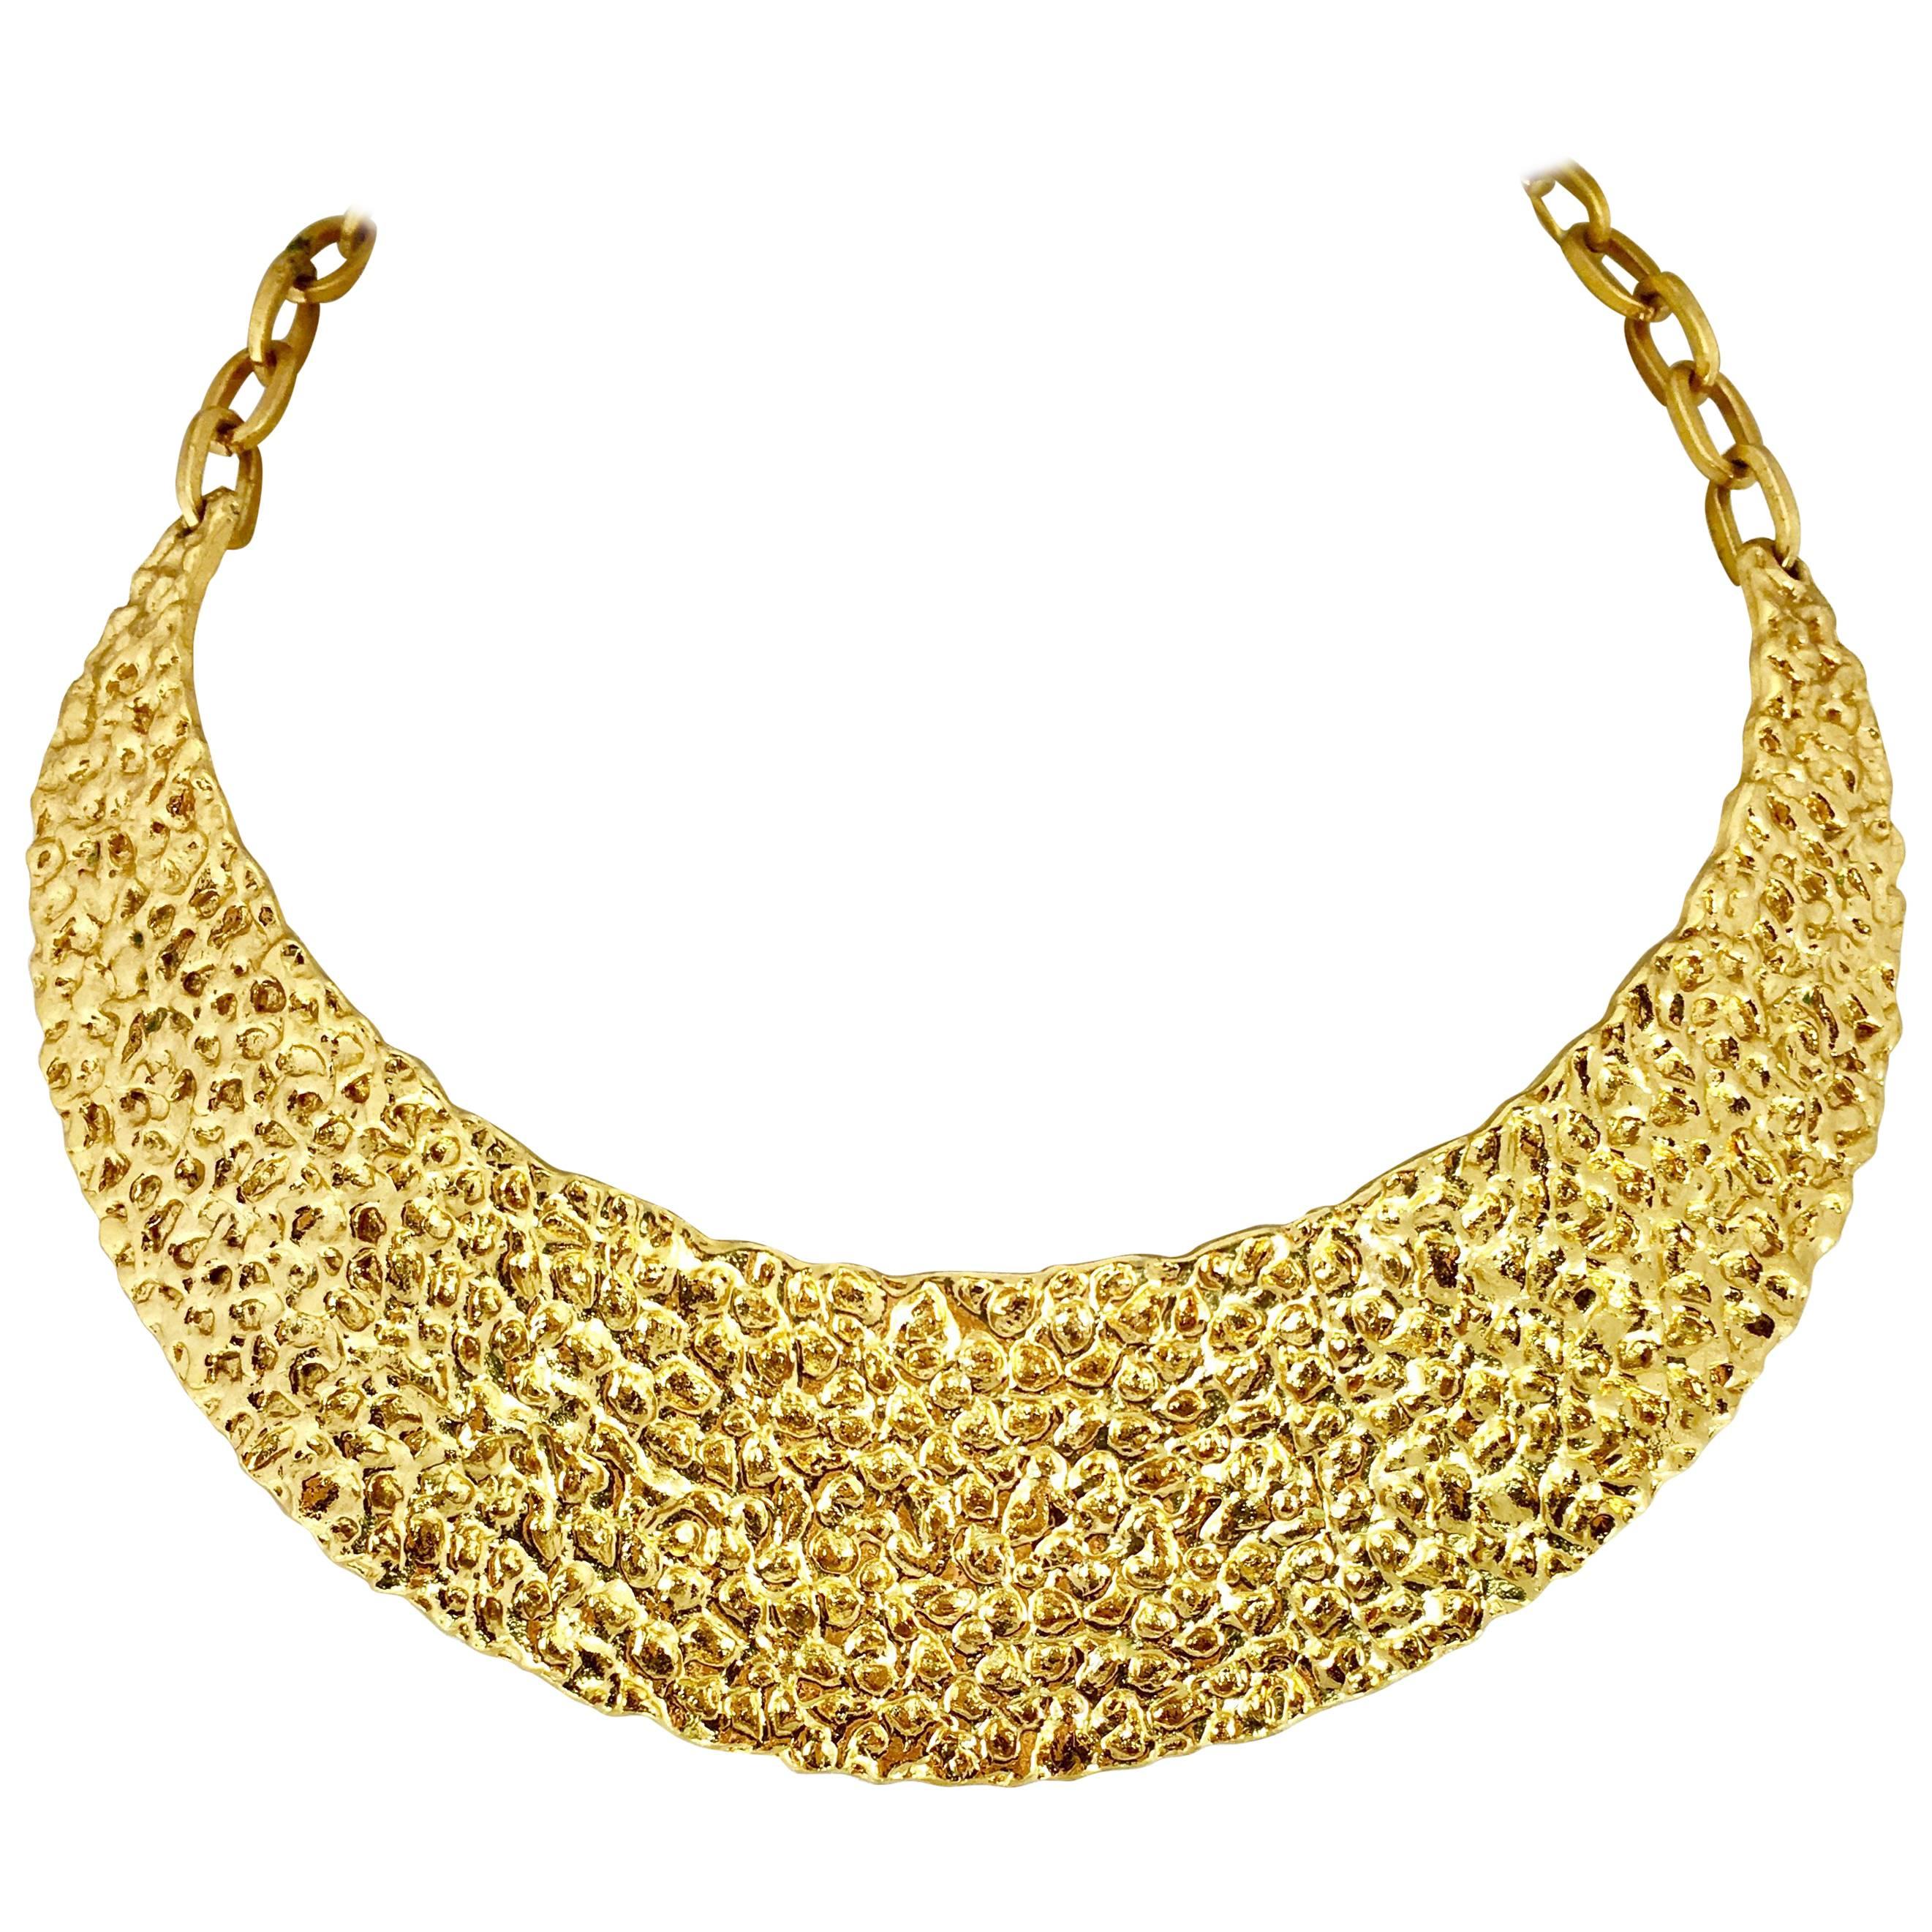 20th Century Modernist Gold Hammered Collar Choker Style Necklace By, Trifari im Angebot